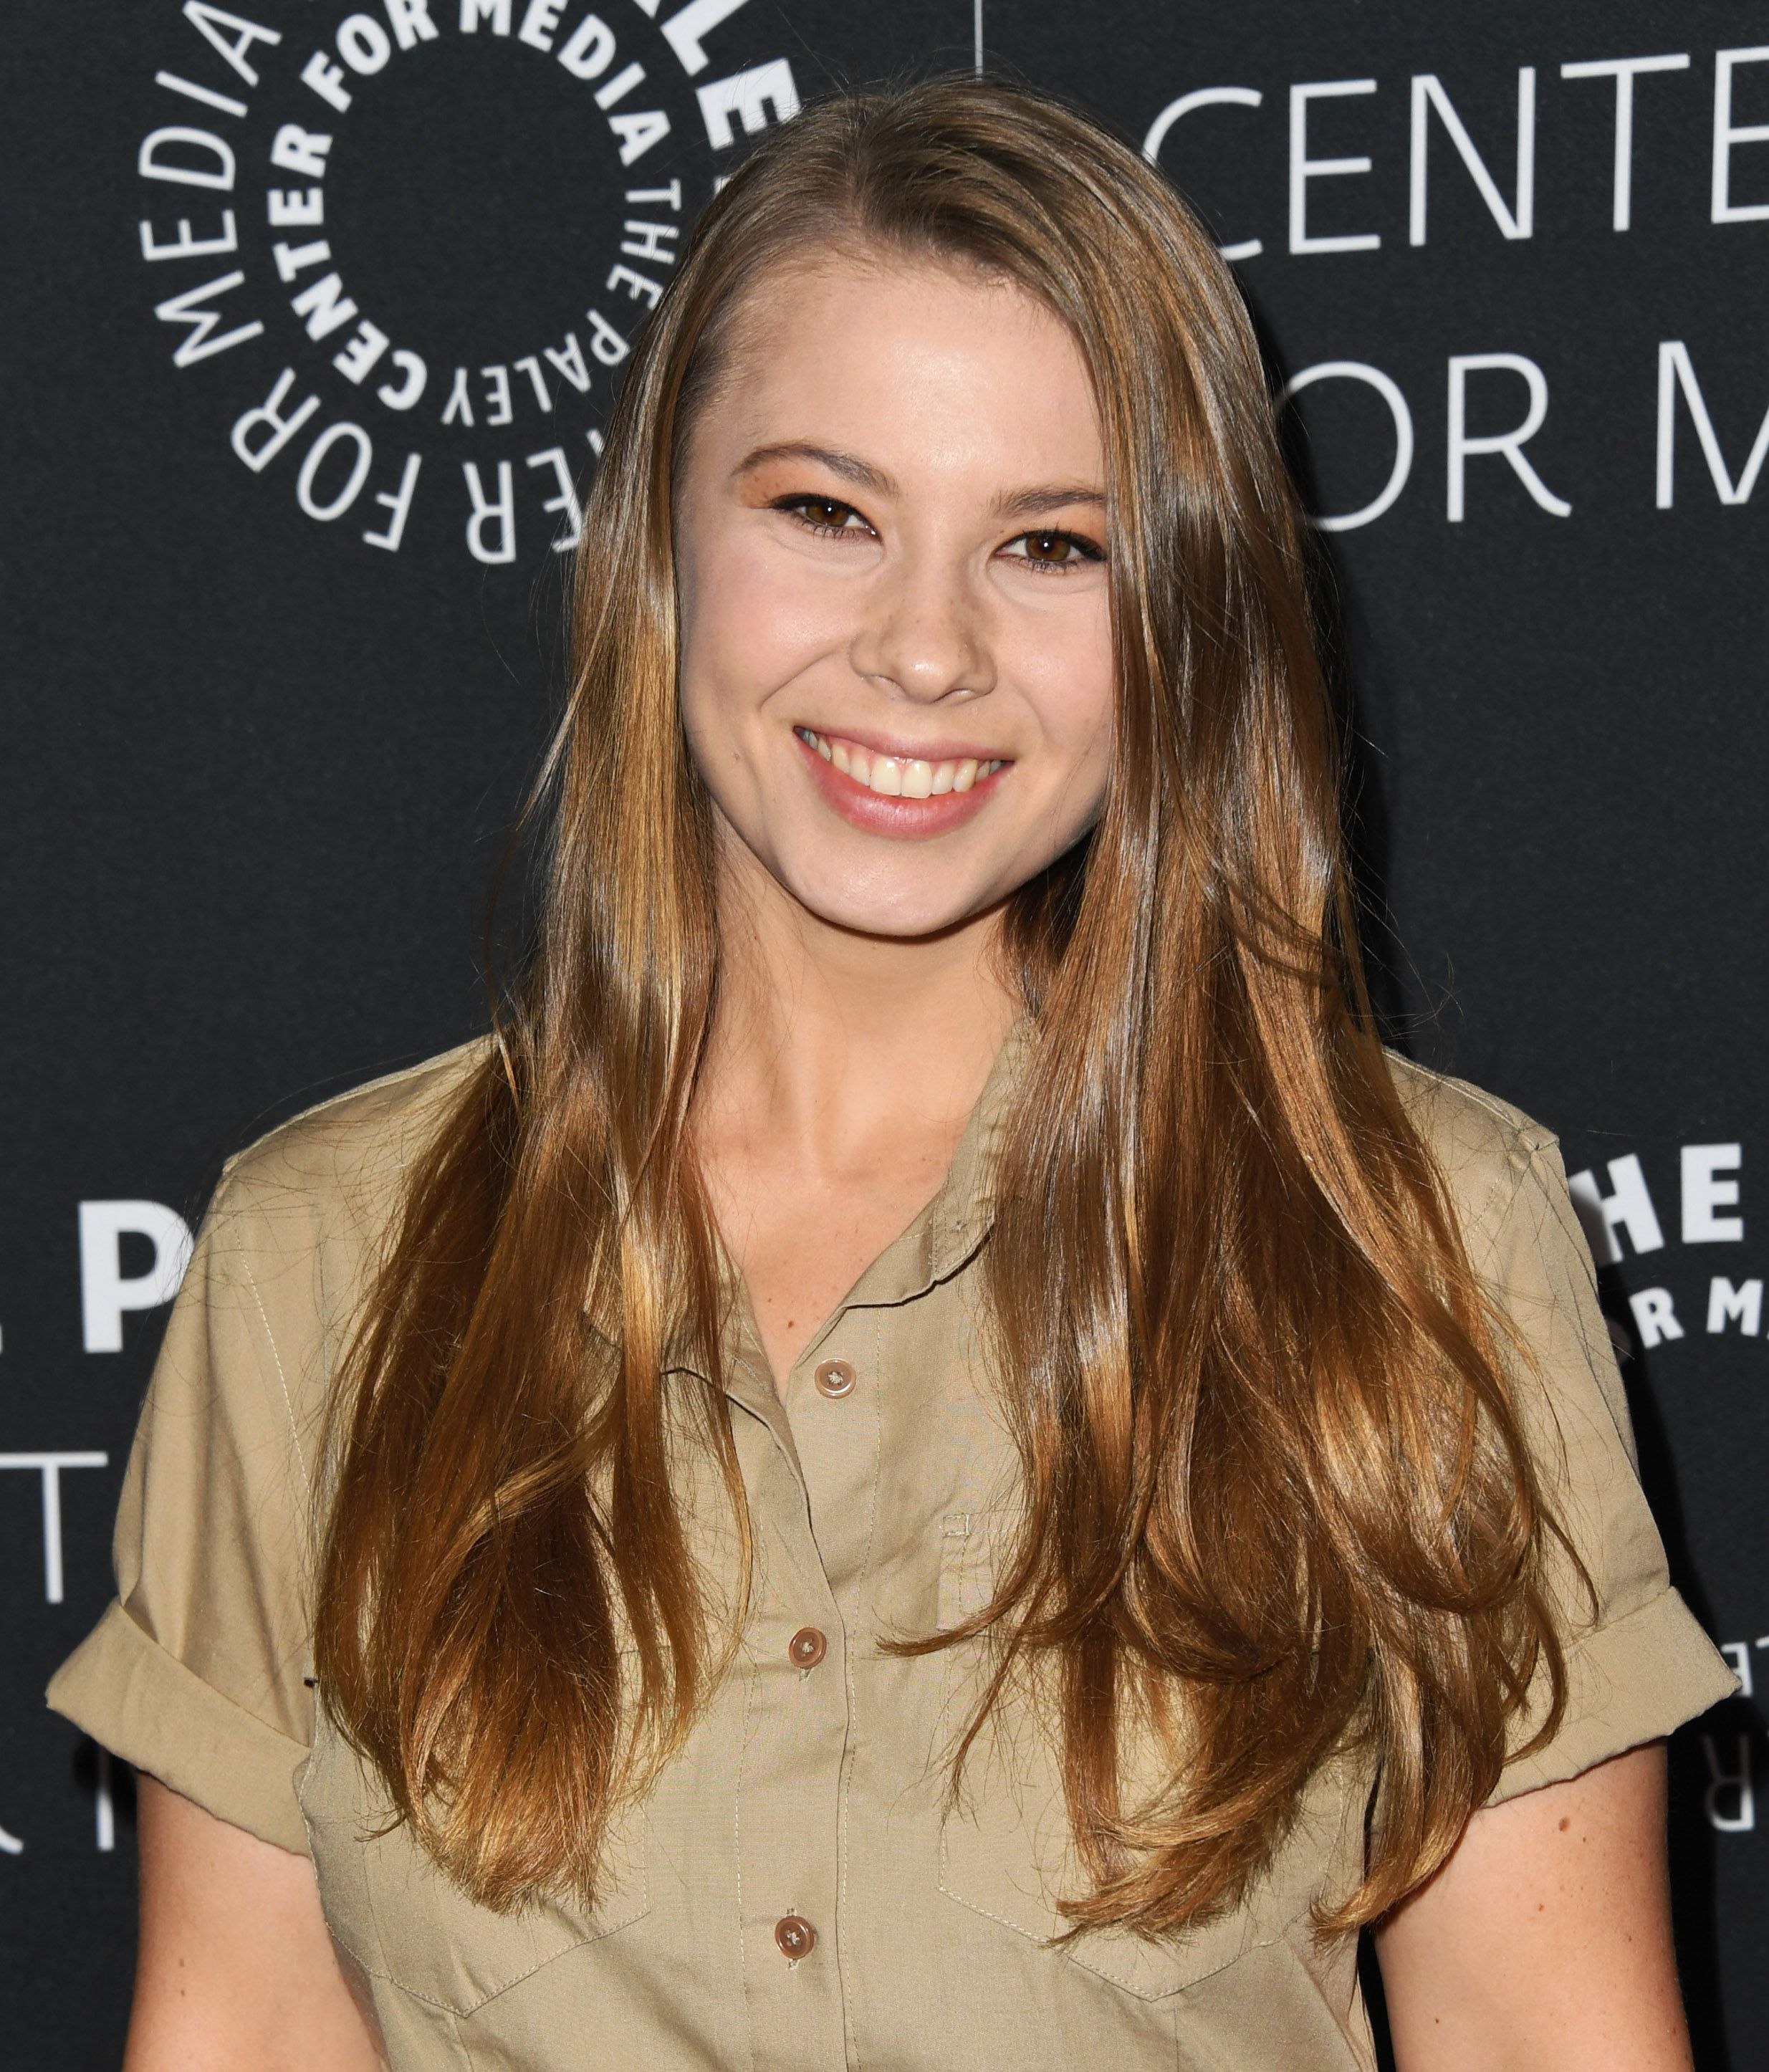 Bindi Irwin at The Paley Center For Media Presents: An Evening With The Irwins: "Crikey! It's The Irwins" Screening And Conversation in Beverly Hills on May 3, 2019 | Getty Images 